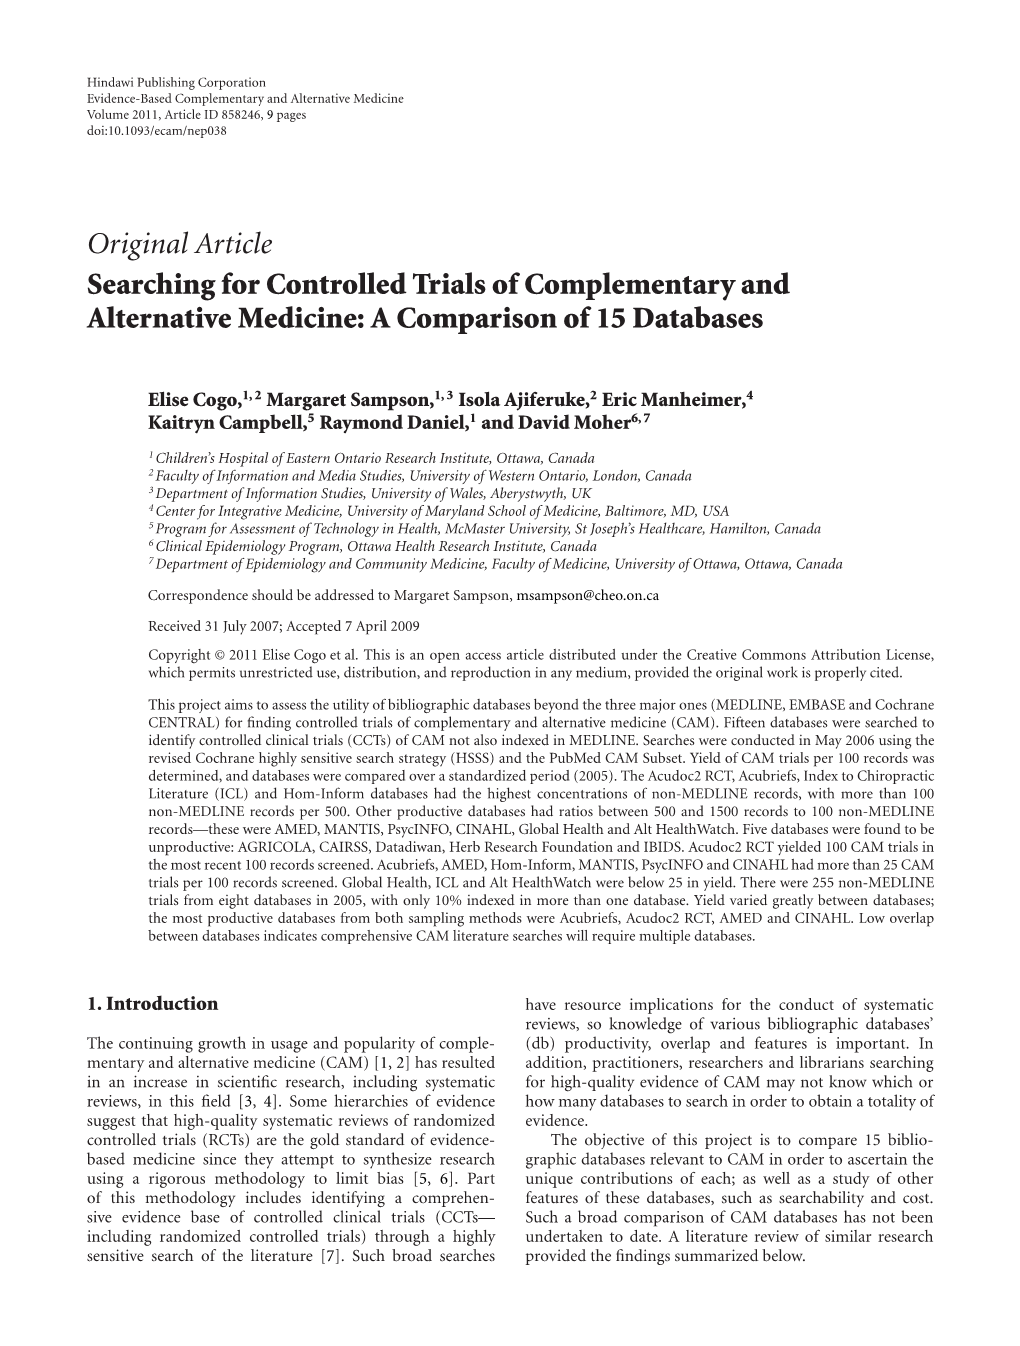 Searching for Controlled Trials of Complementary and Alternative Medicine: a Comparison of 15 Databases